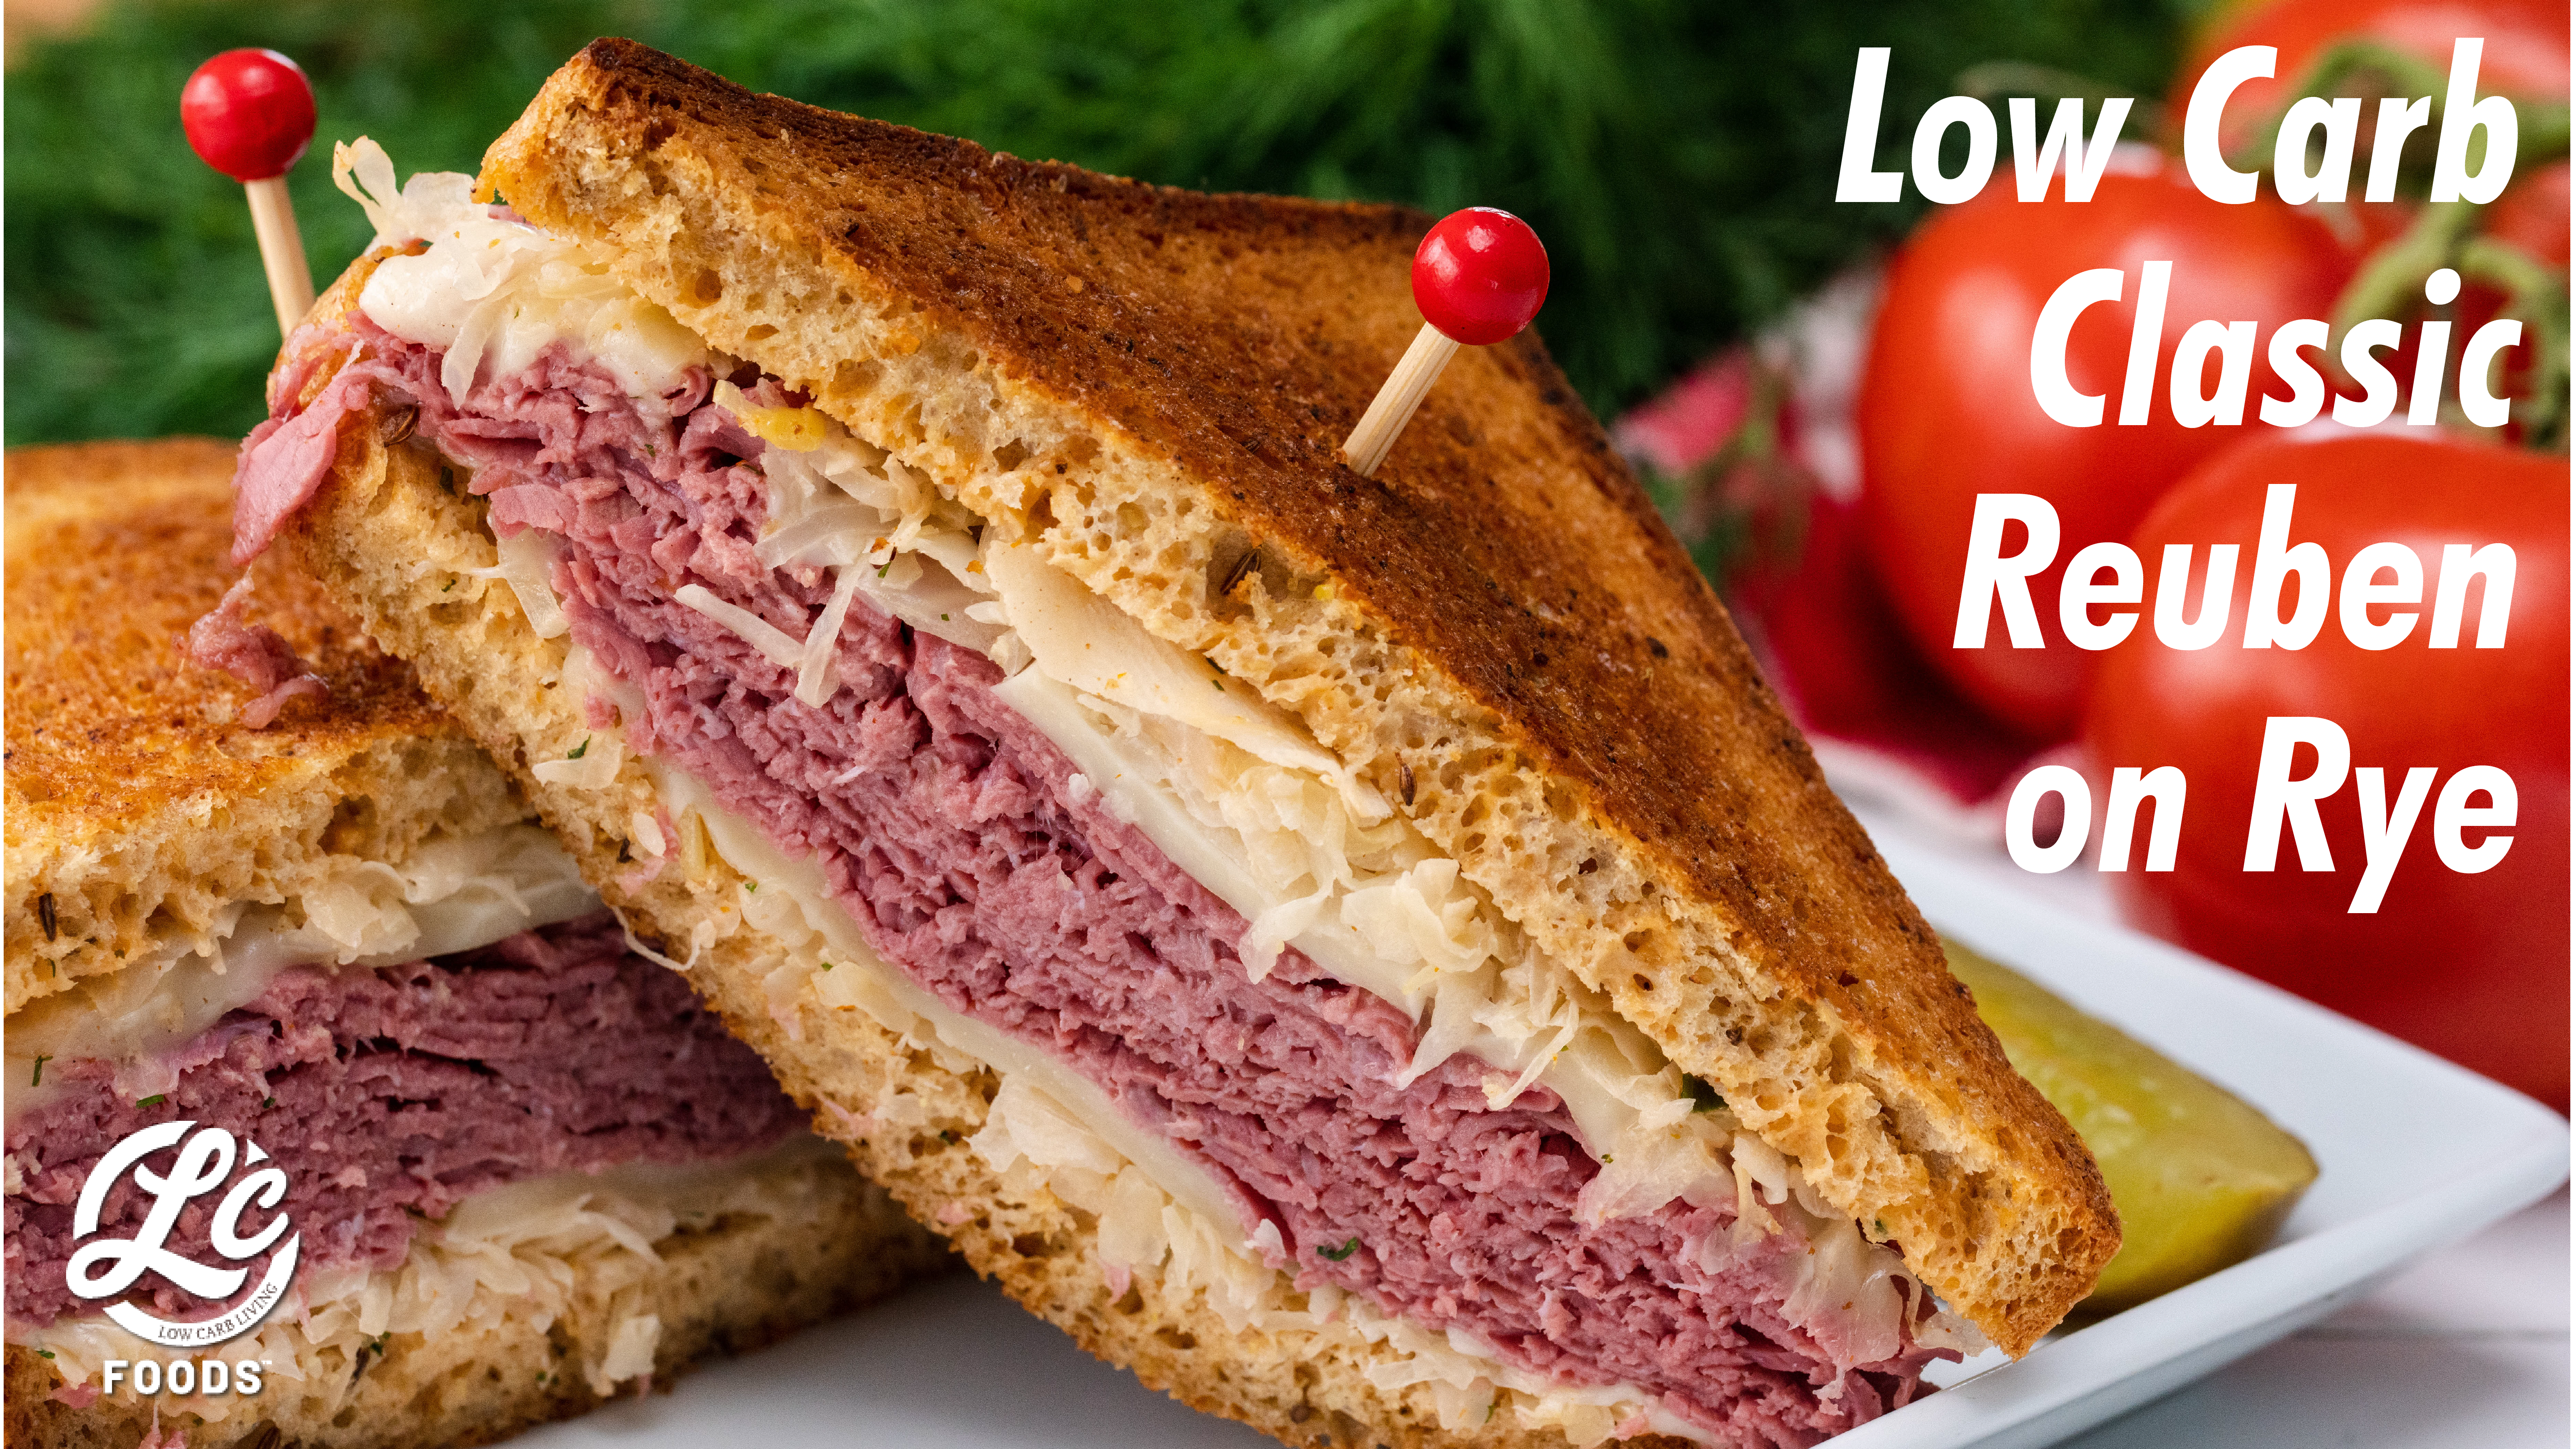 Thumbnail for Classic Reuben on Low Carb Rye Bread